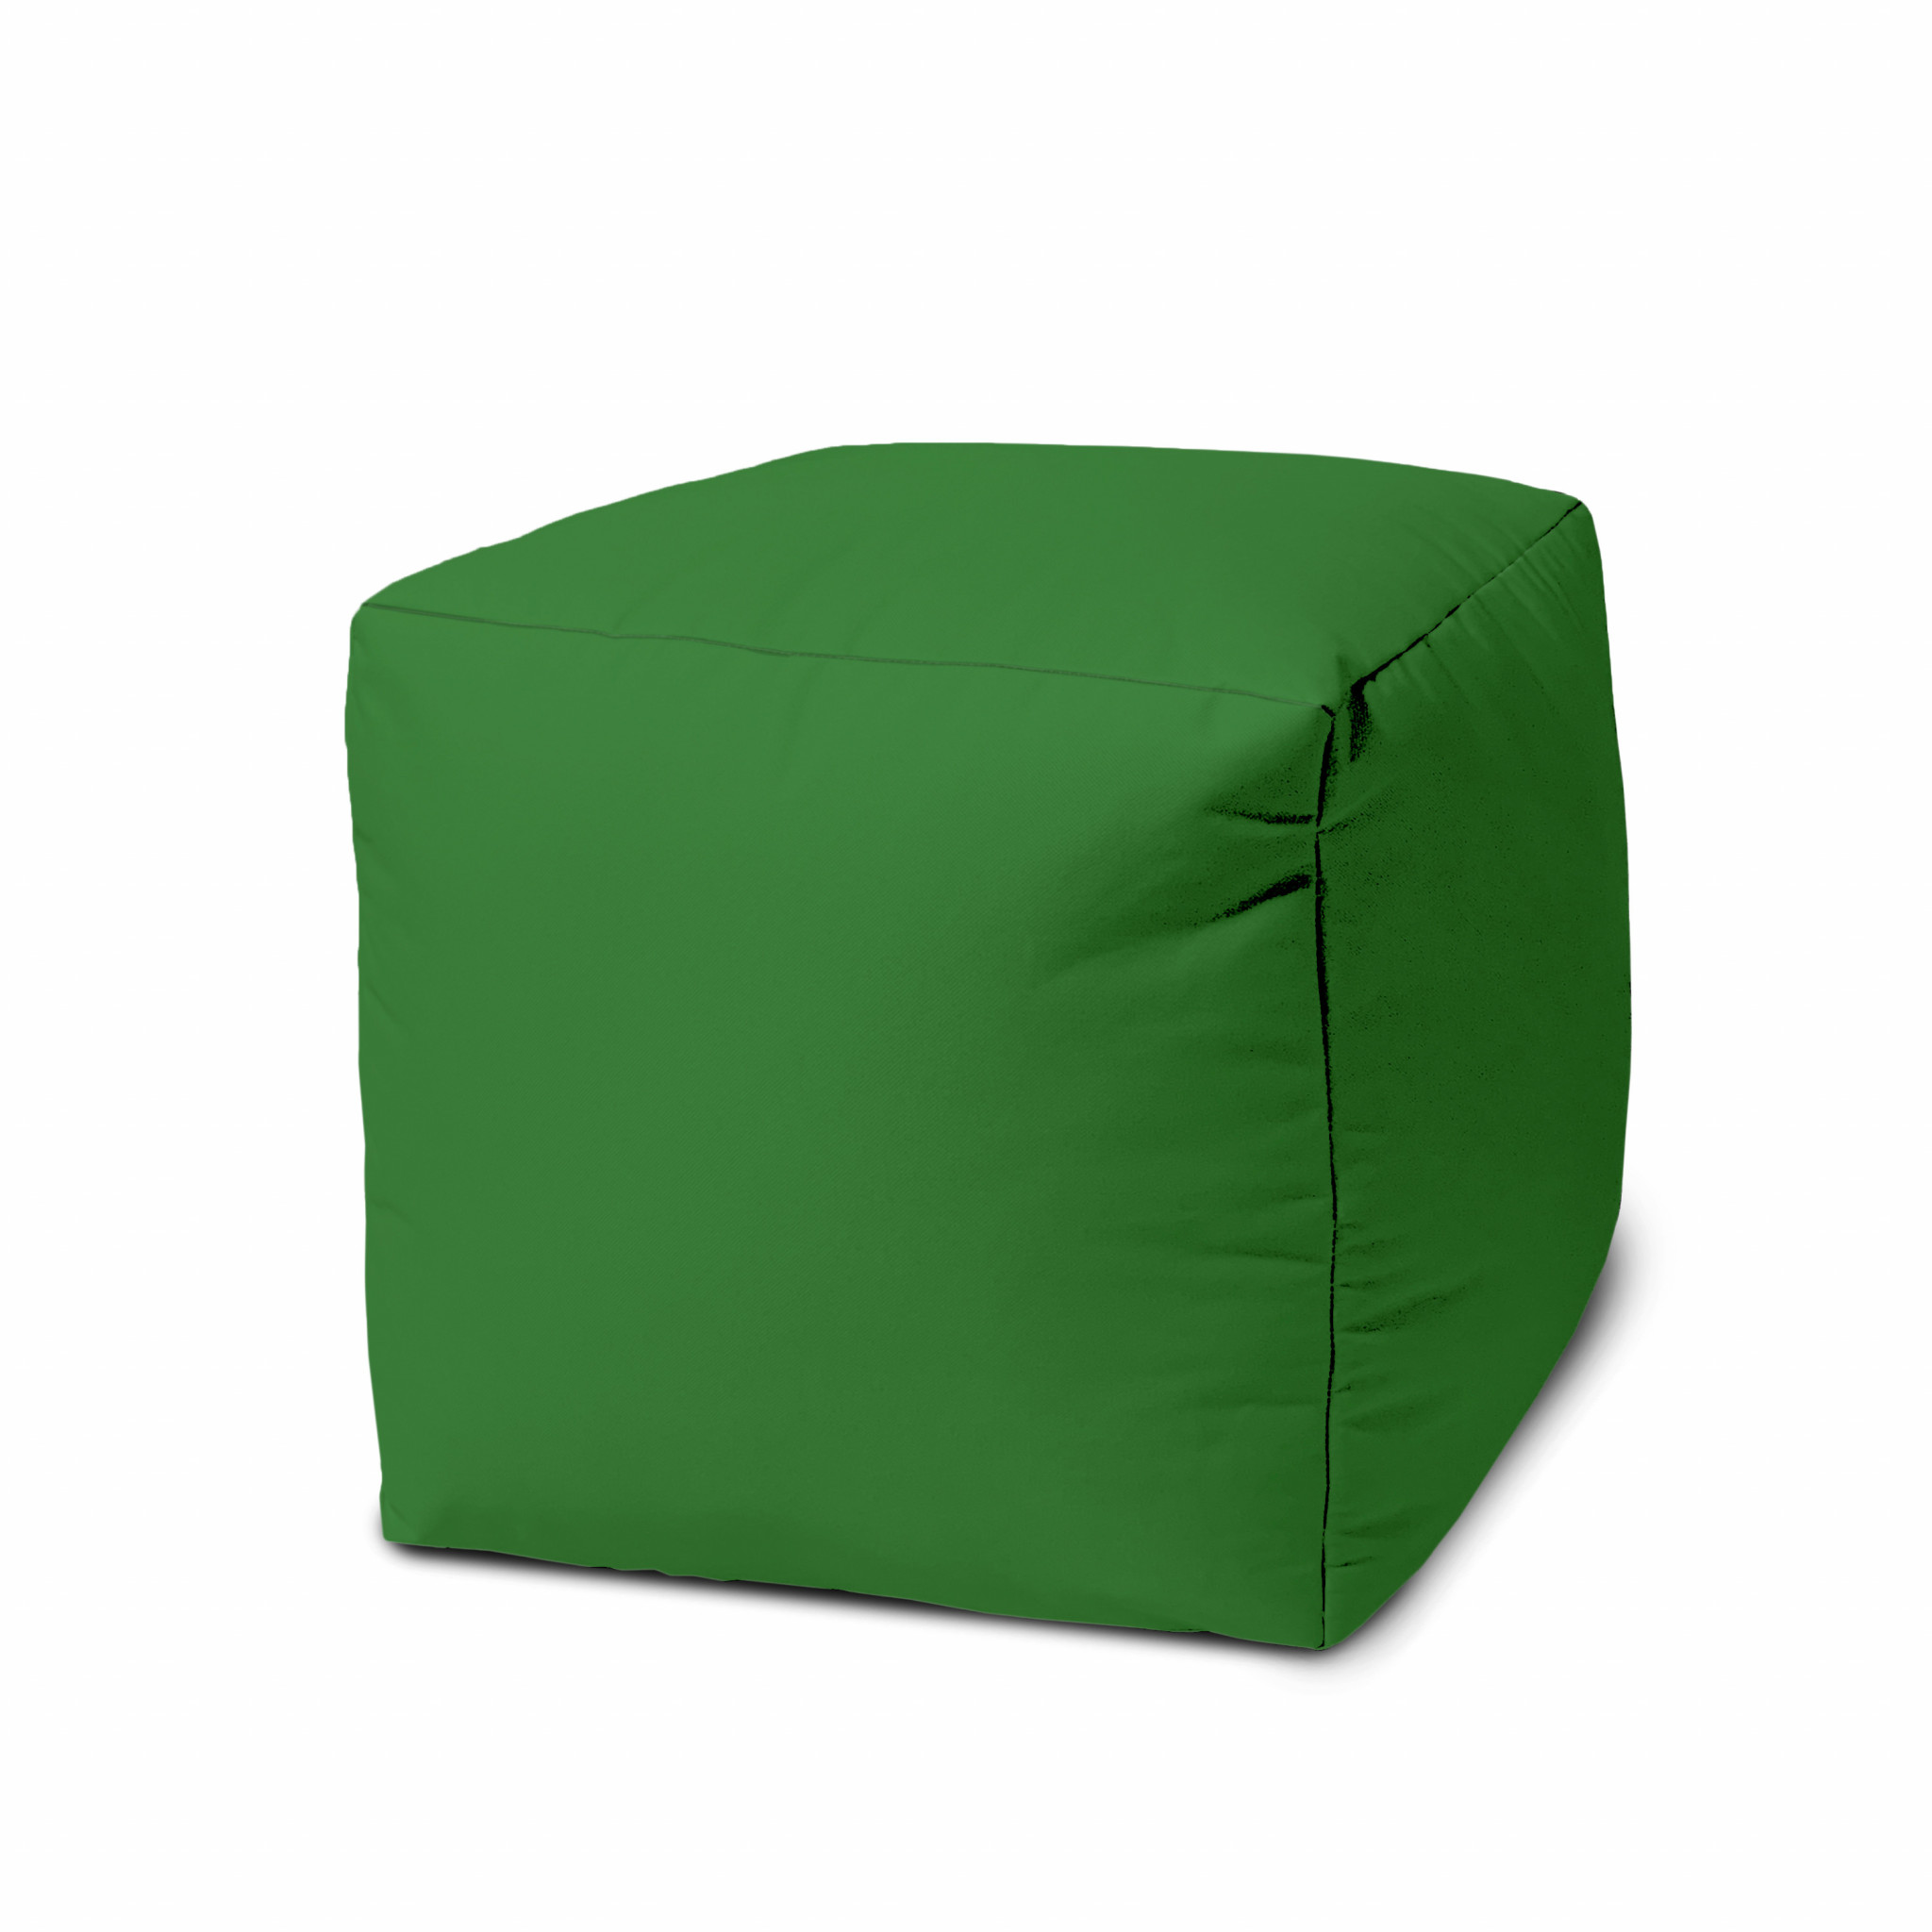 17 Cool Hunter Green Solid Color Indoor Outdoor Pouf Cover